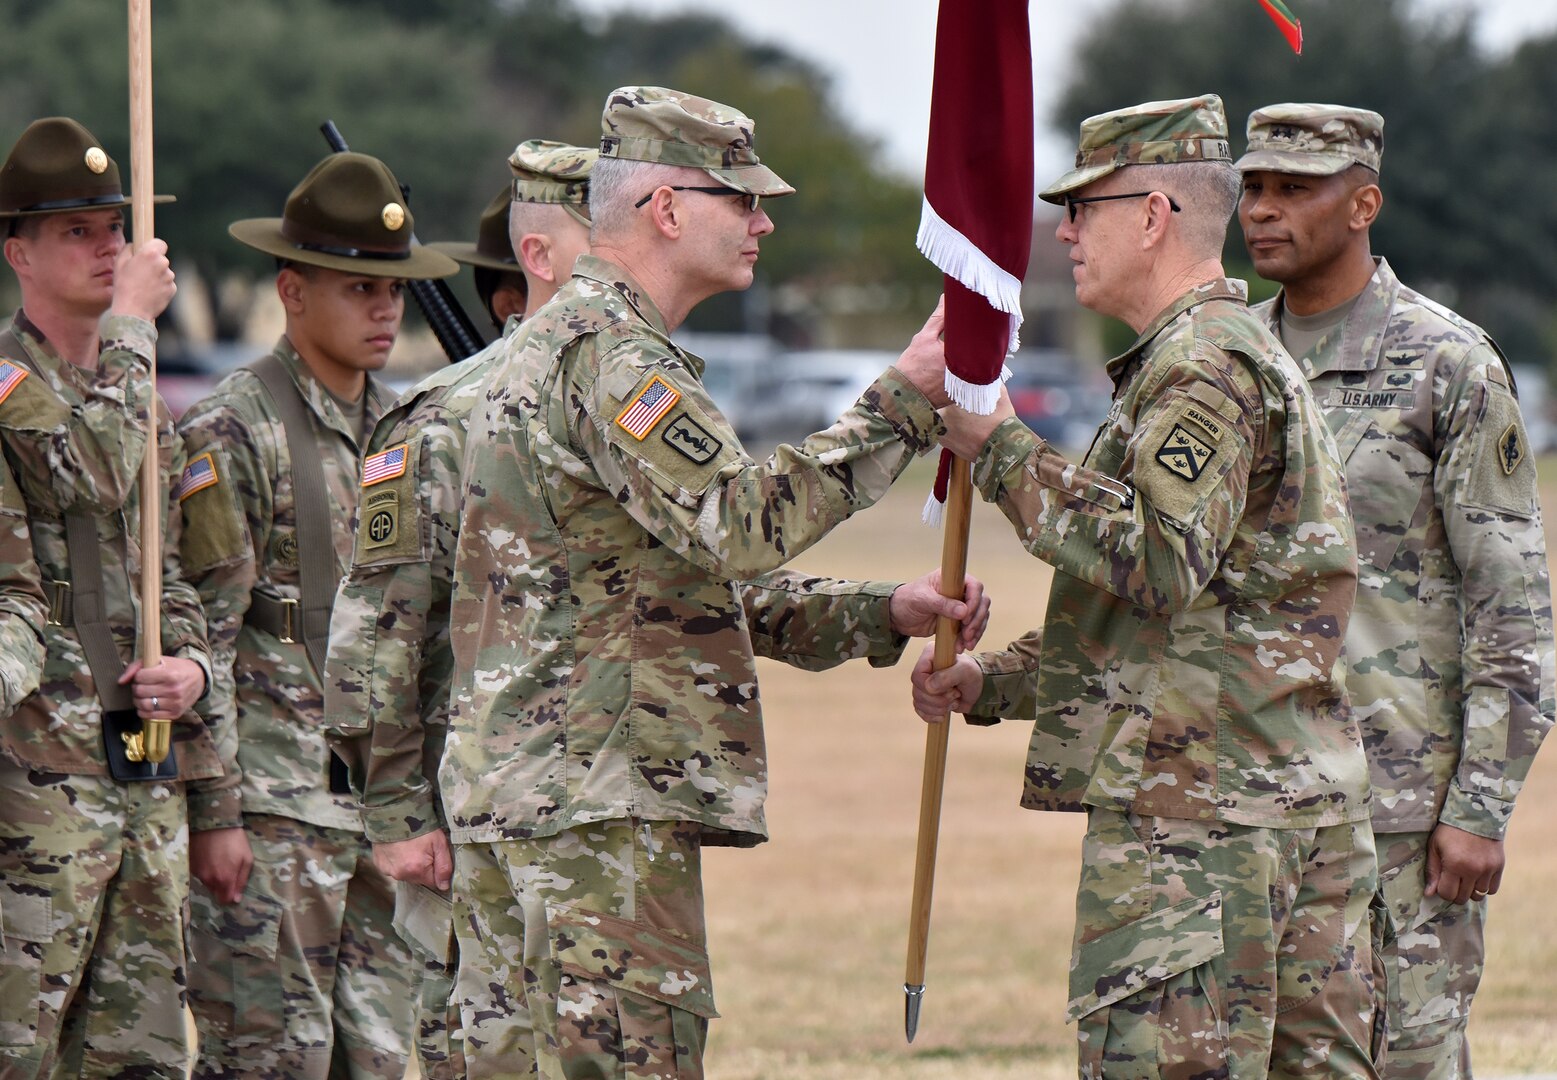 Lt. Gen. James E. Rainey (center), commanding general, U.S. Army Combined Arms Center, passes the MEDCoE colors to incoming commander Maj. Gen. Dennis P. LeMaster (left) as outgoing commander Maj. Gen. Patrick D. Sargent looks on during the U.S. Army Medical Center of Excellence change of command ceremony at Joint Base San Antonio-Fort Sam Houston Jan. 10.